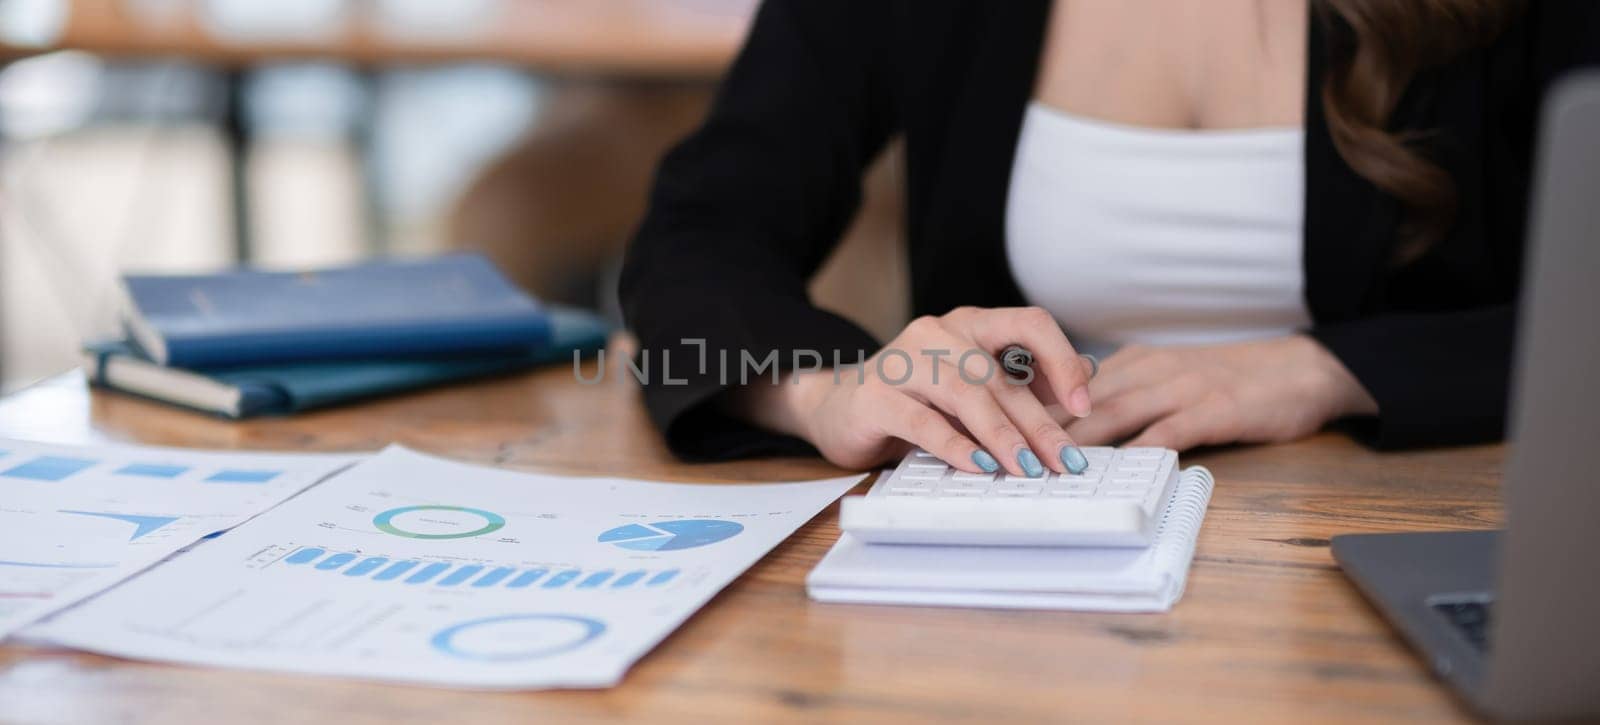 Beautiful accountant sitting with laptop calculating financial and tax figures for company on table in office room.